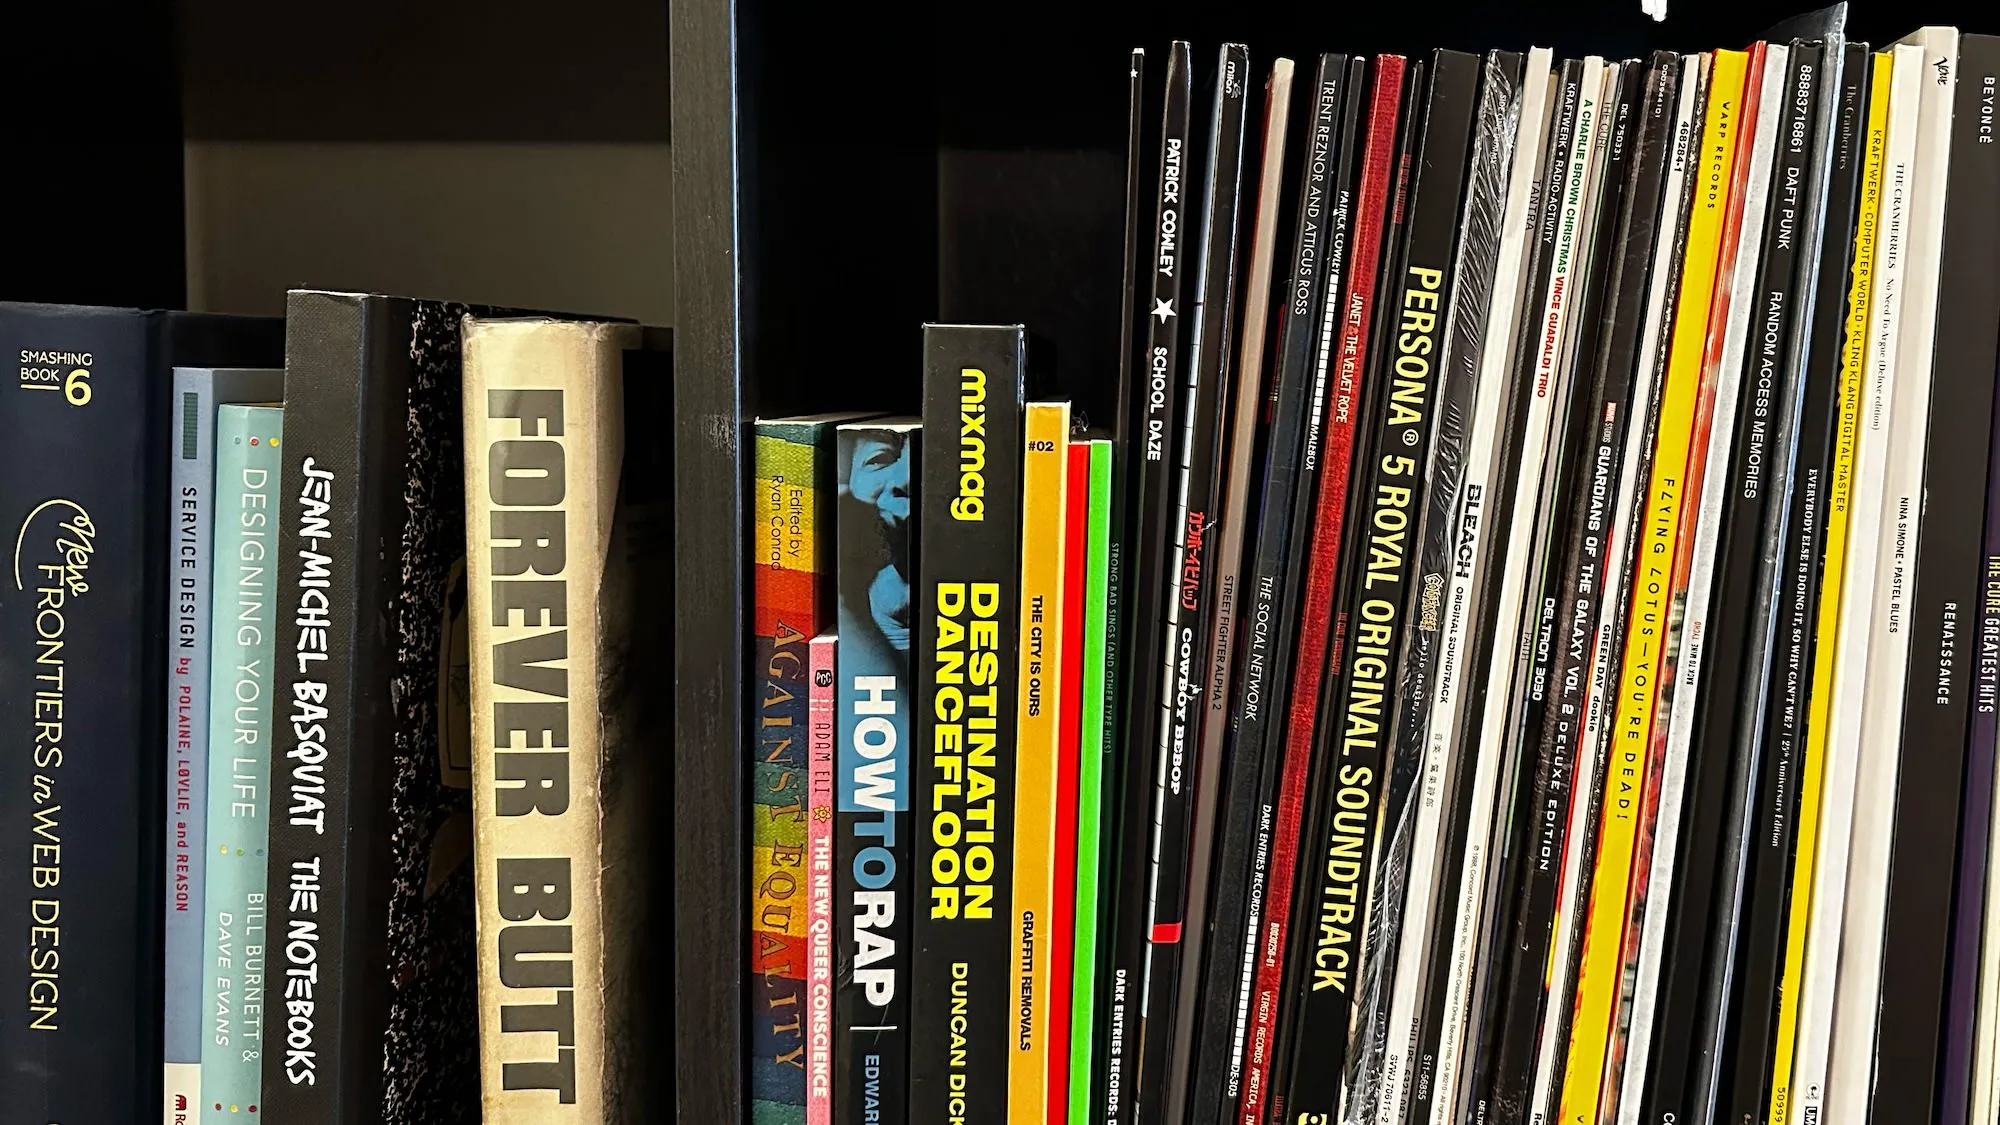 A bookshelf containing media of various different types, books, art, comics, and vinyl records, all arranged in square cubes.